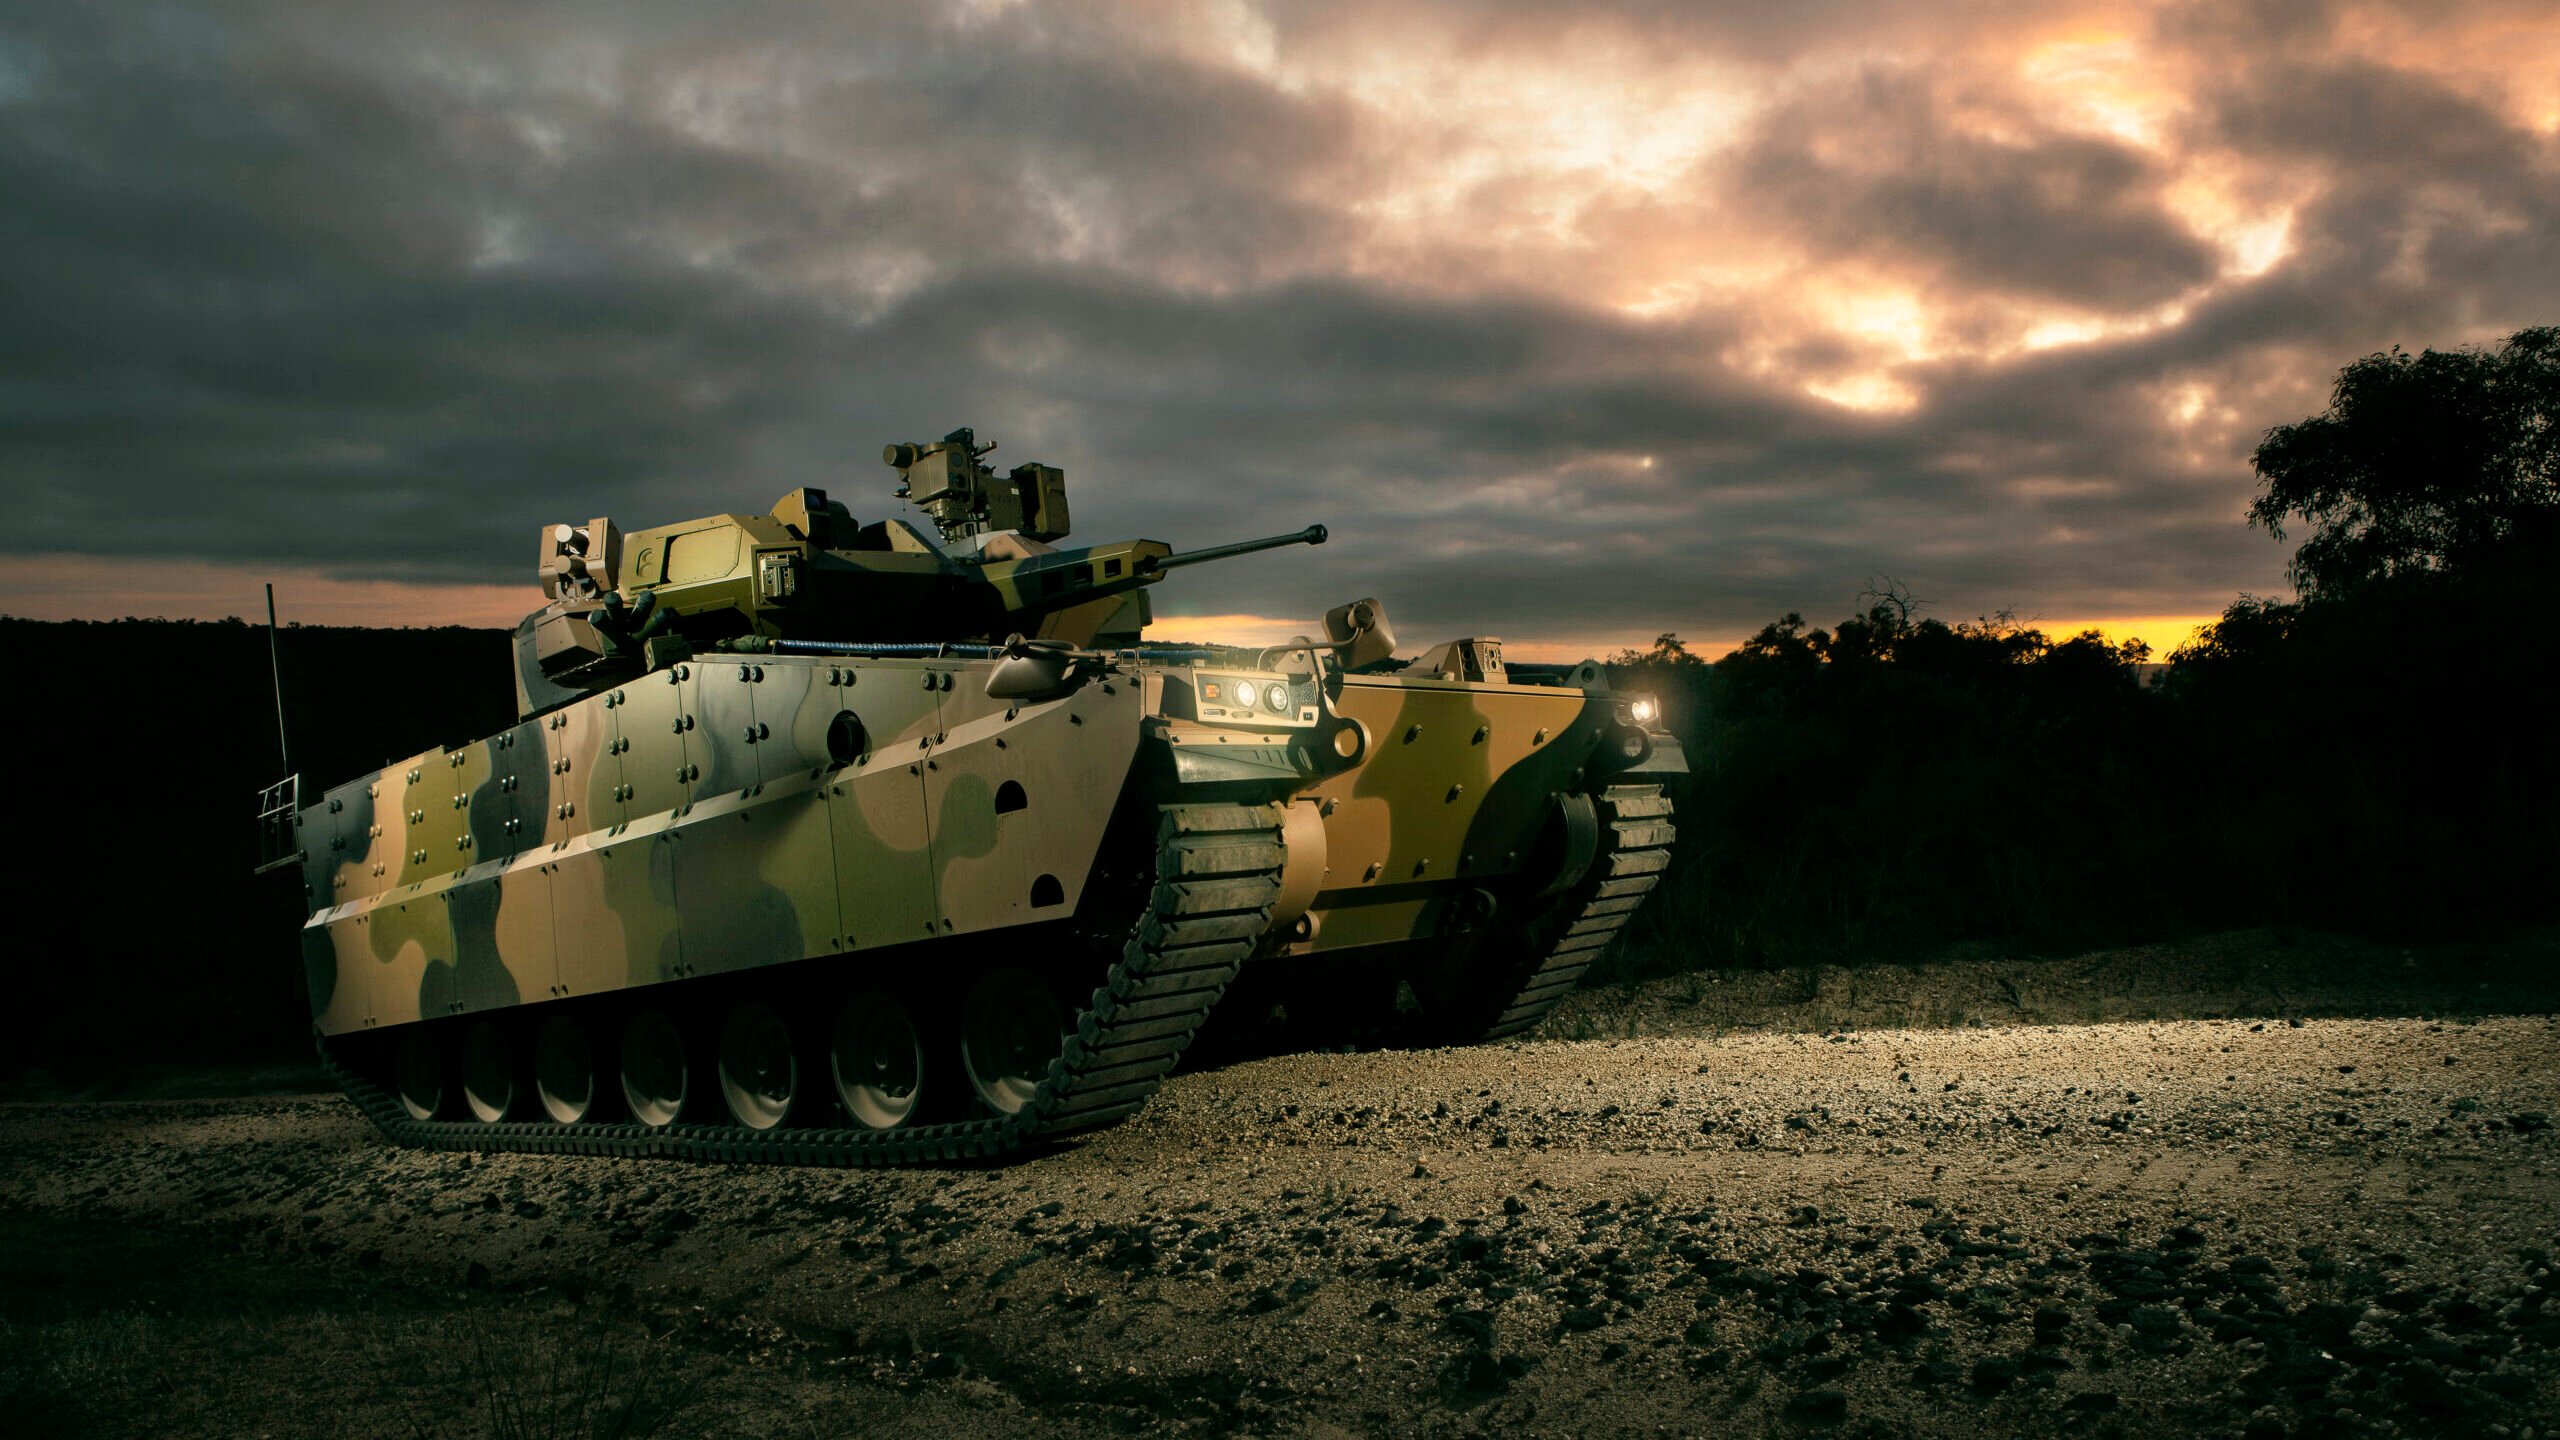 OMFV race revs up: All 5 competitors bid to build Bradley replacement prototypes